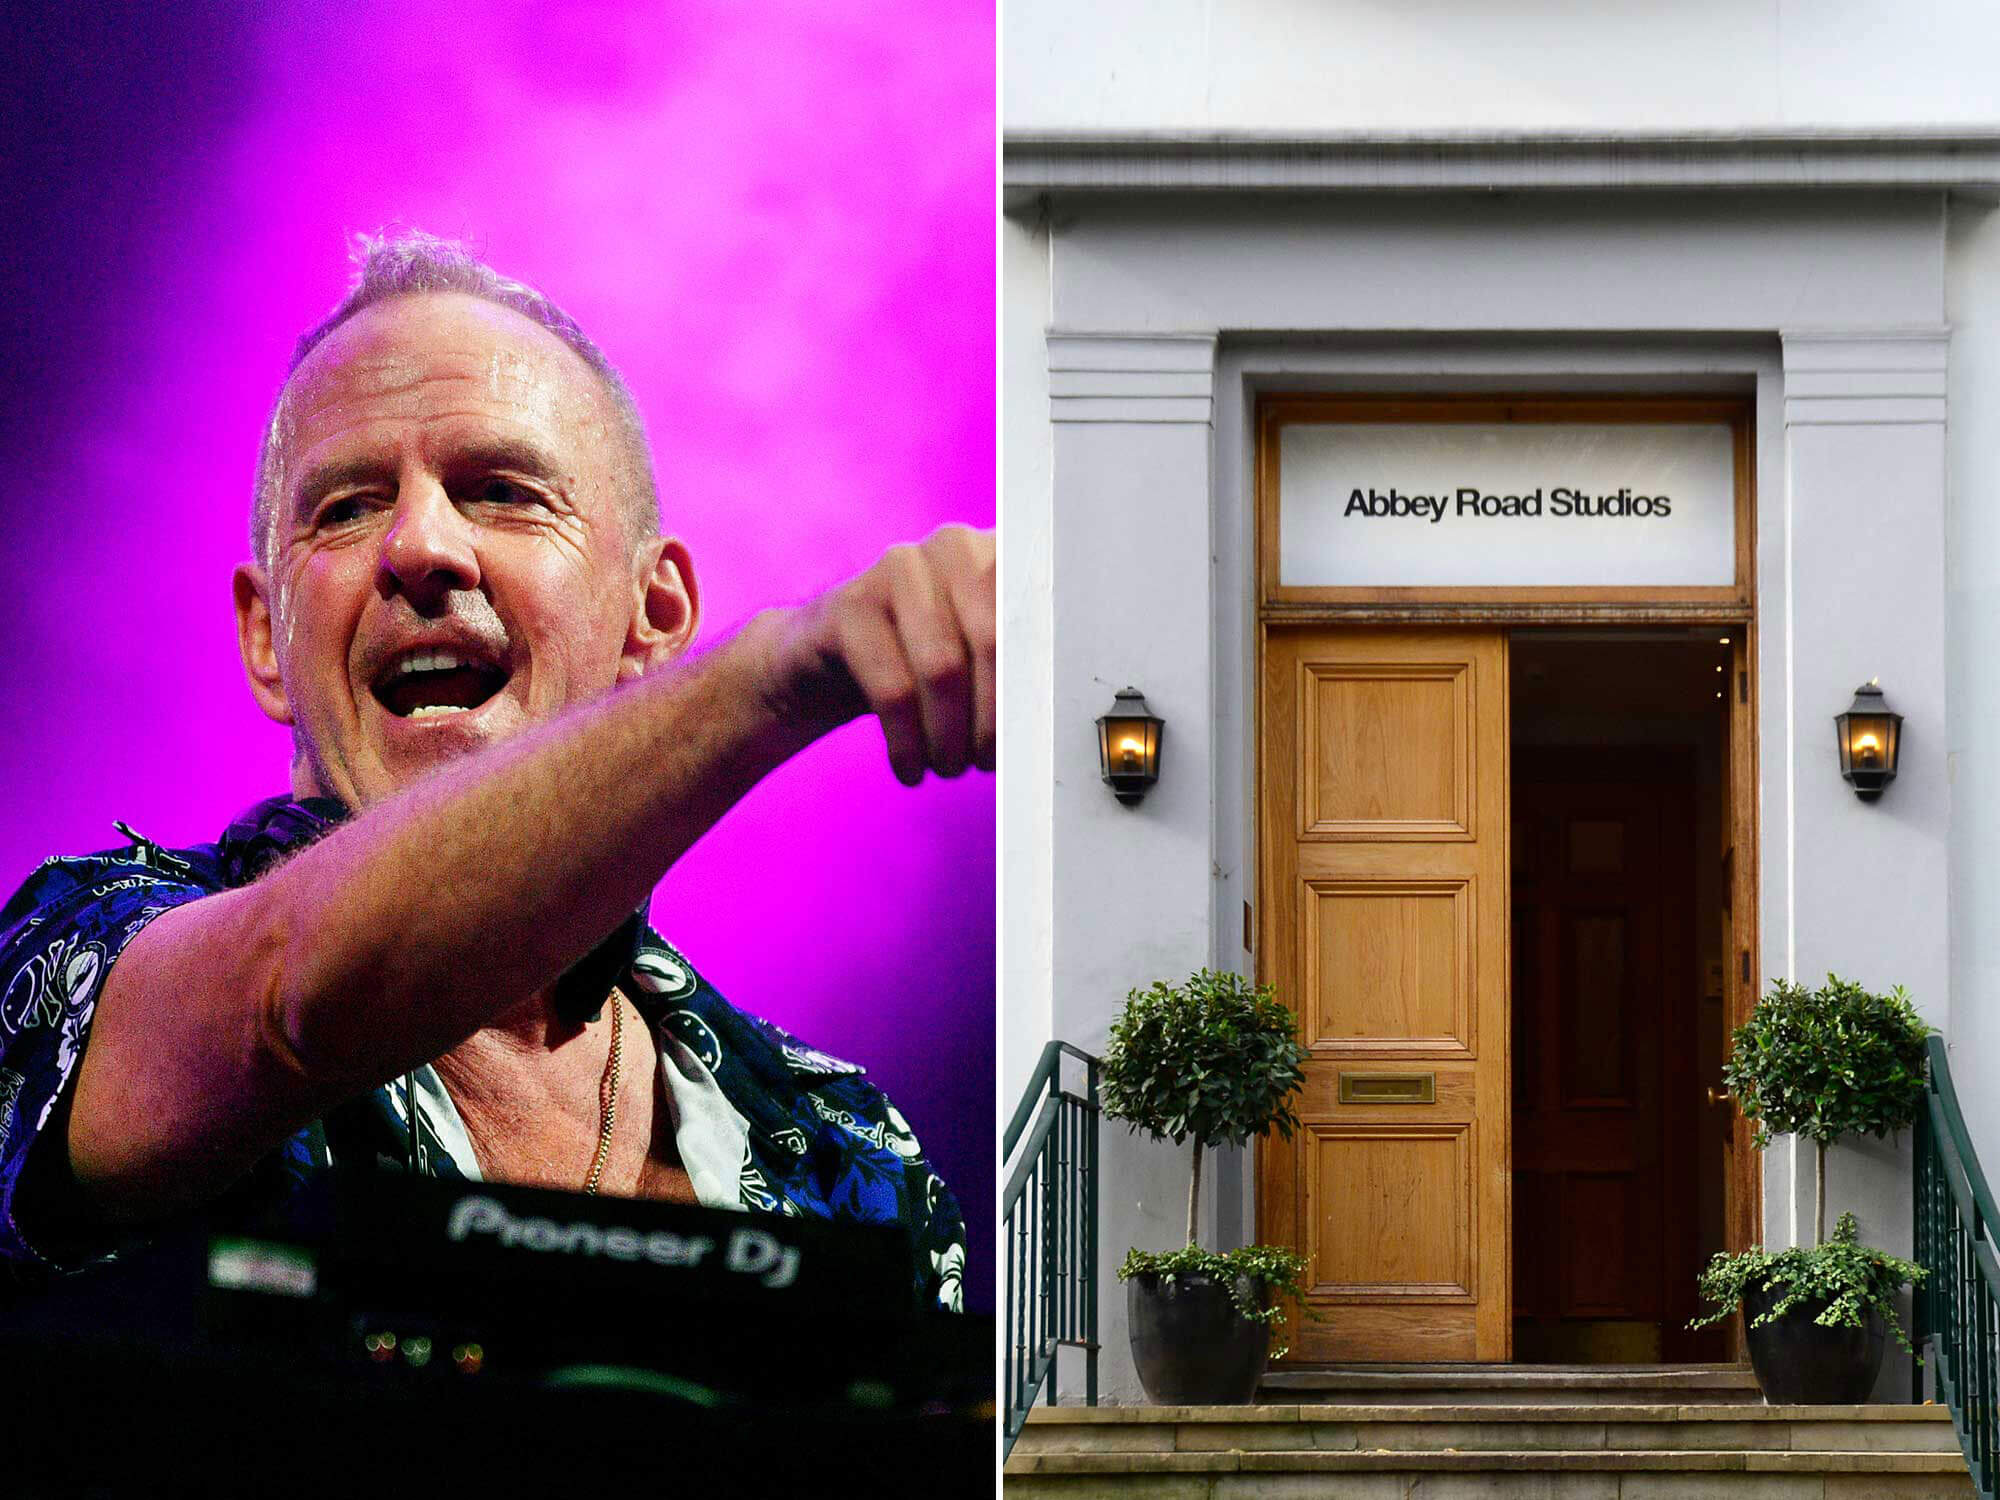 Left: Fatboy Slim DJing Right: The entrance to Abbey Road Studios in London, England